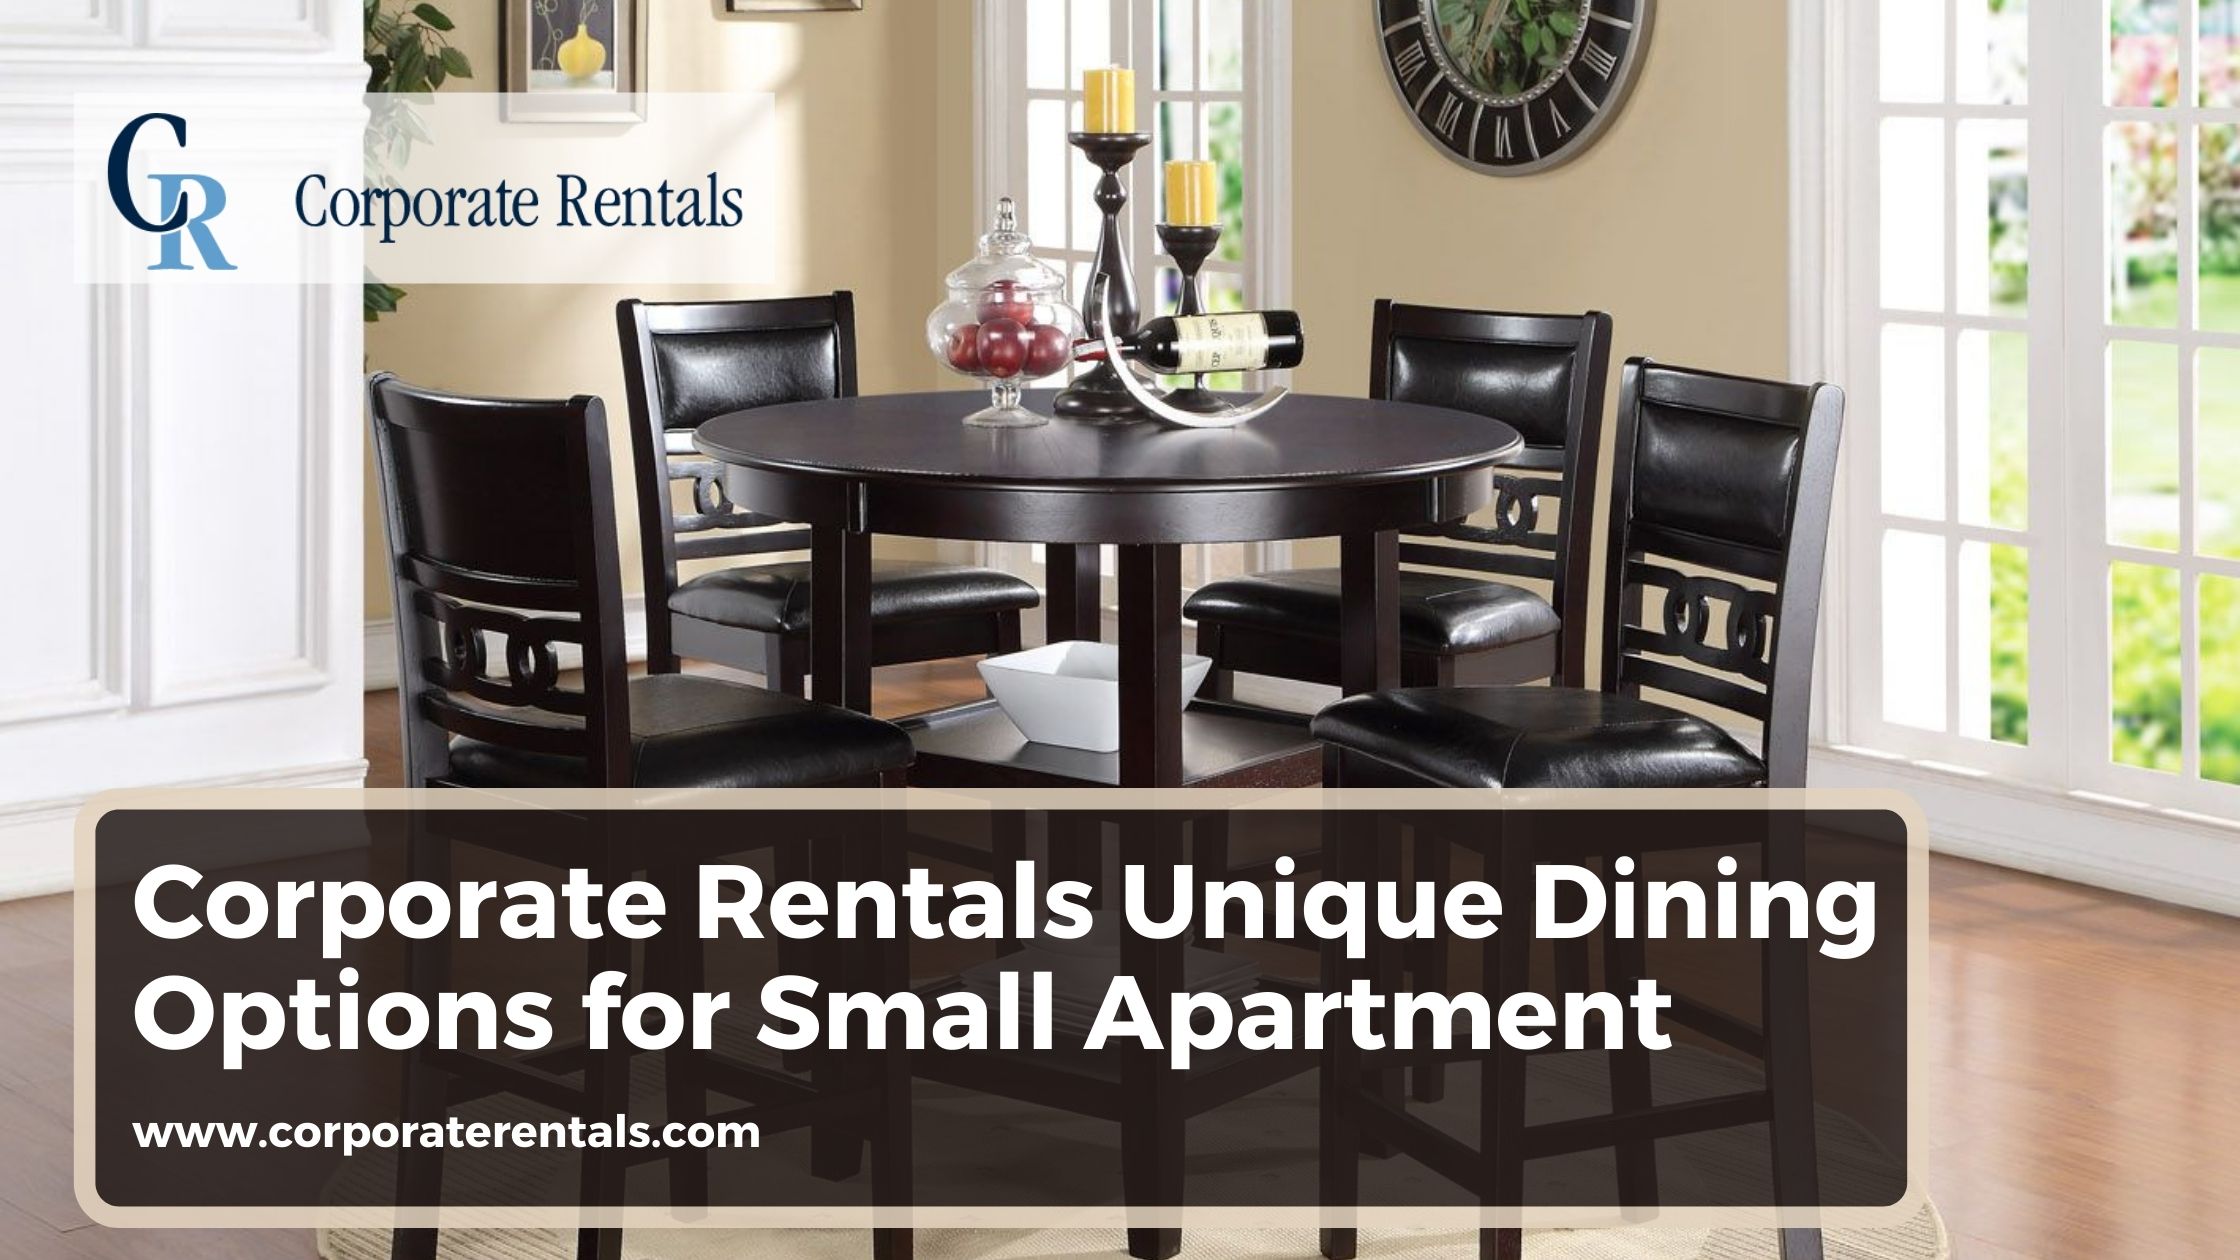 Corporate Rentals Unique Dining Options for Small Apartment